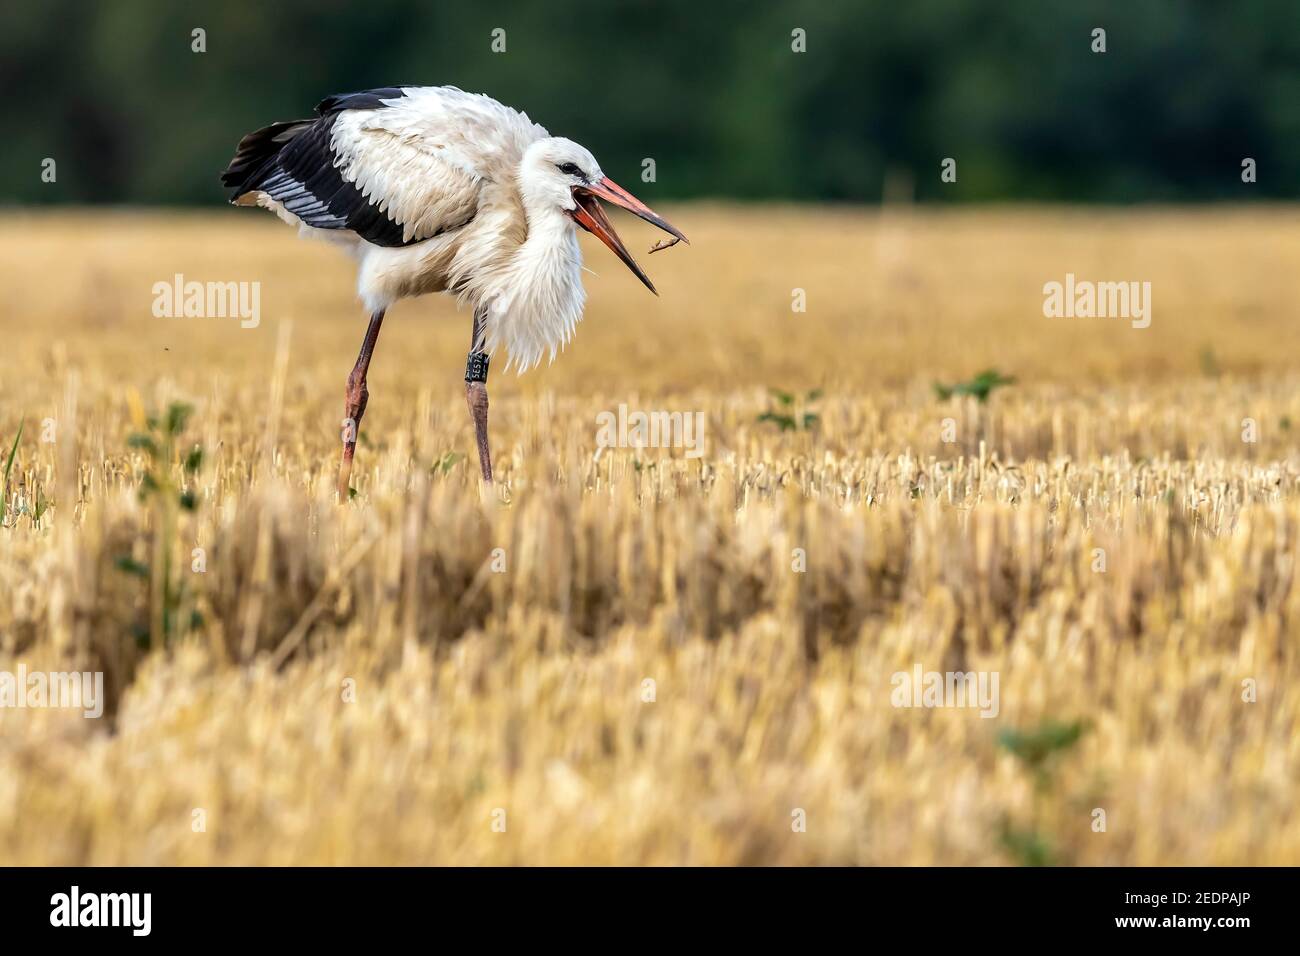 white stork (Ciconia ciconia), Immature eating a worm in an agricultural field, Belgium, Zaventem Stock Photo